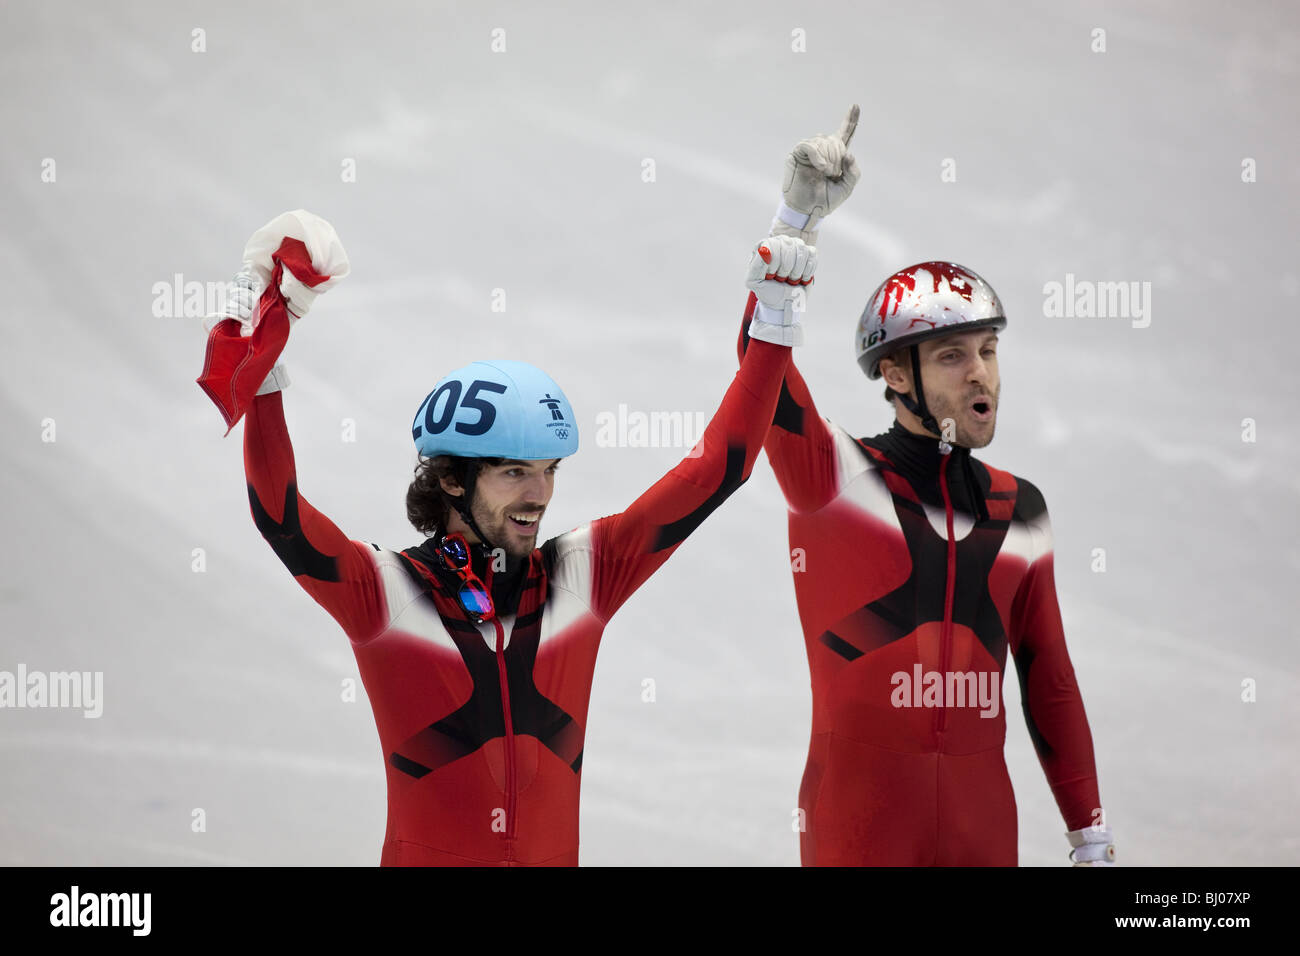 Charles Hamelin (CAN) and Francois-Louis Tremblay (CAN) after winning the gold and bronze medals in the Short Track 500m semi Stock Photo